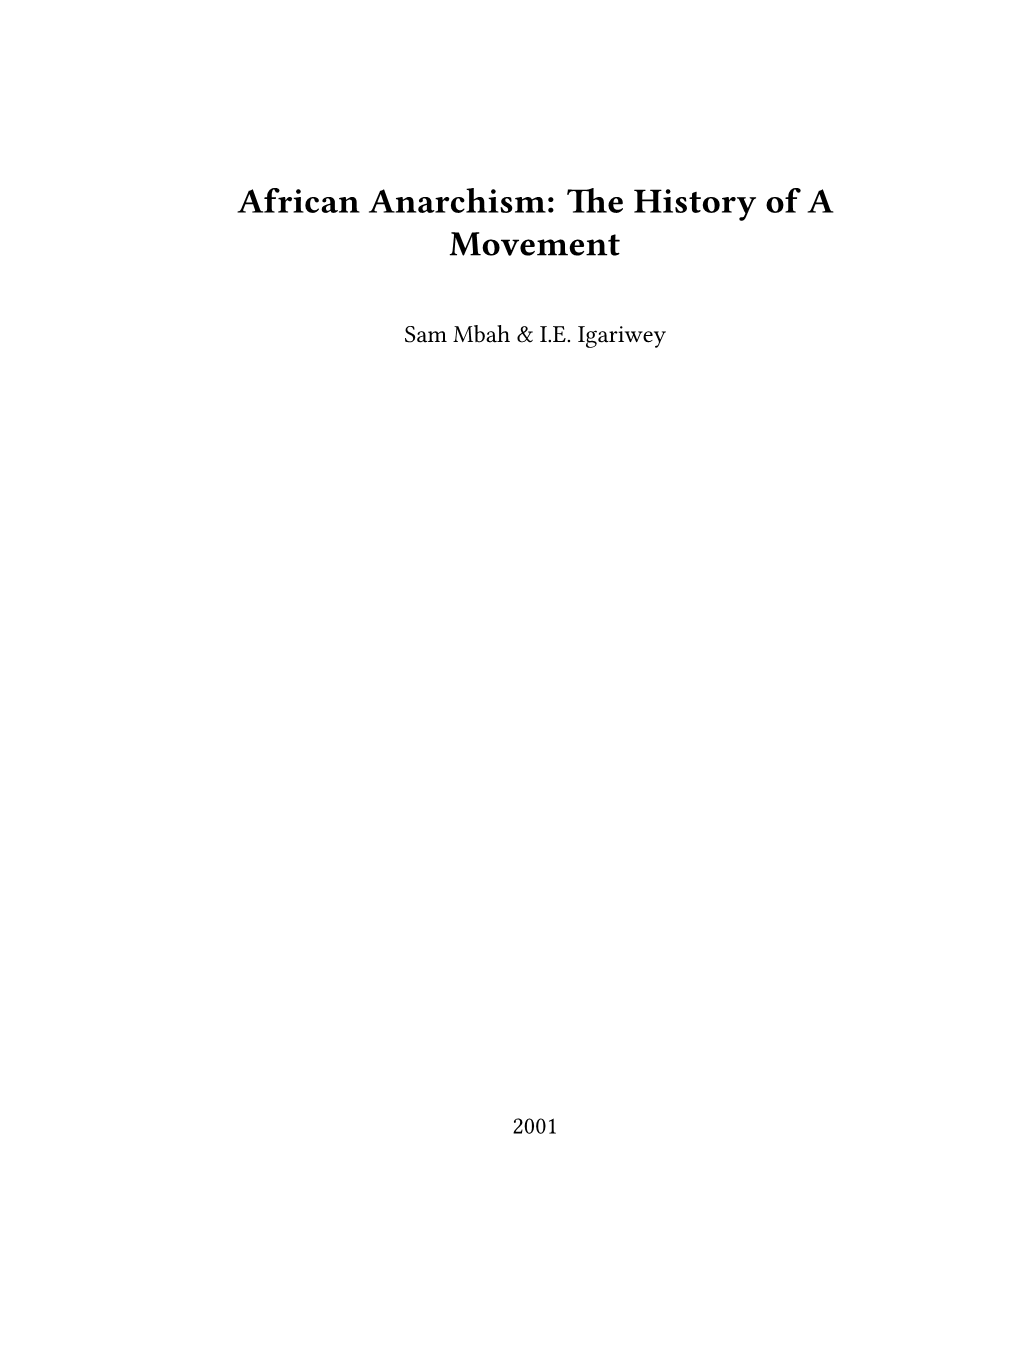 African Anarchism: the History of a Movement